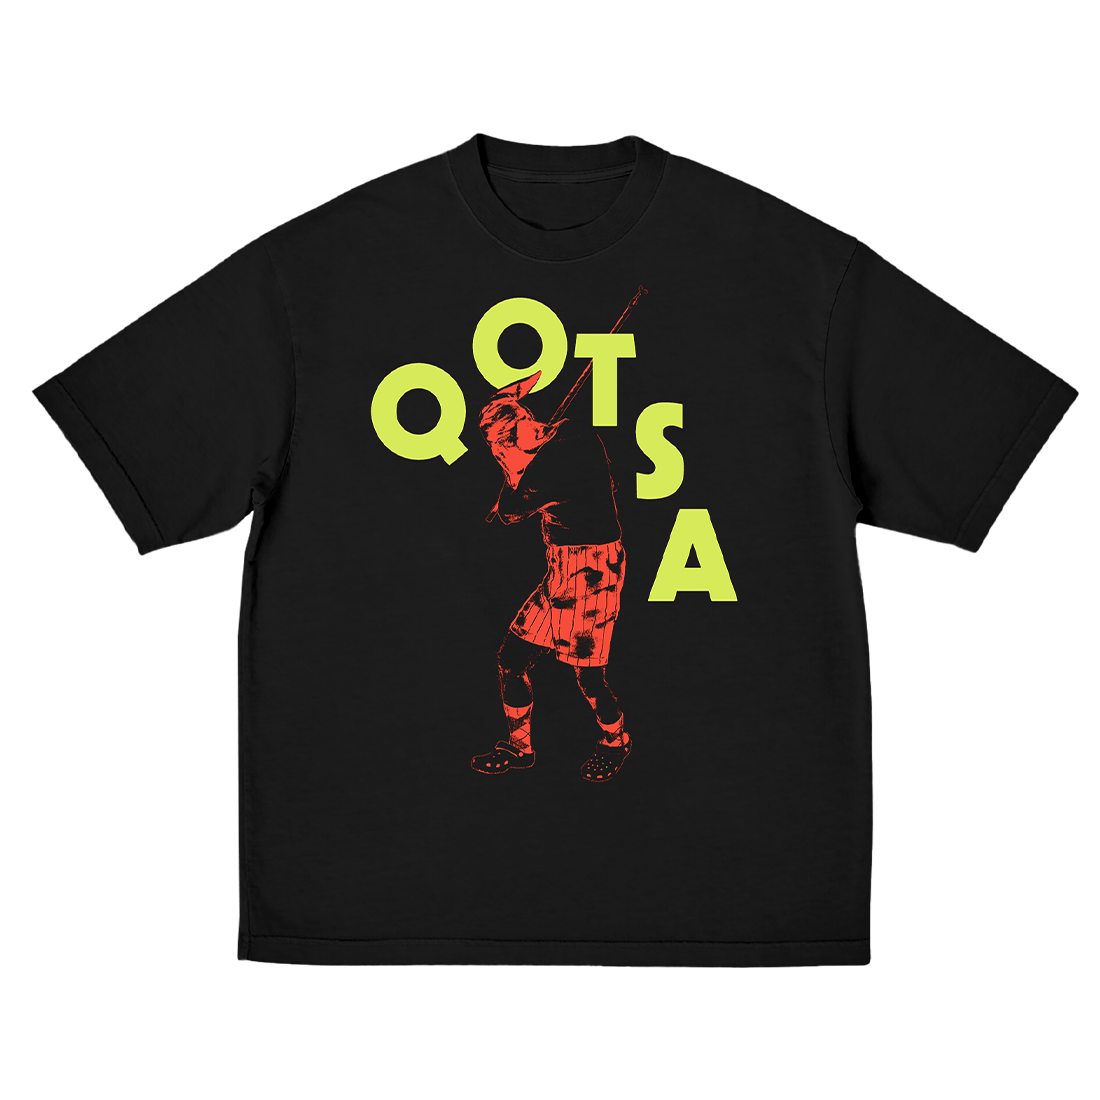 Queens Of The Stone Age - Executioner T-Shirt Black